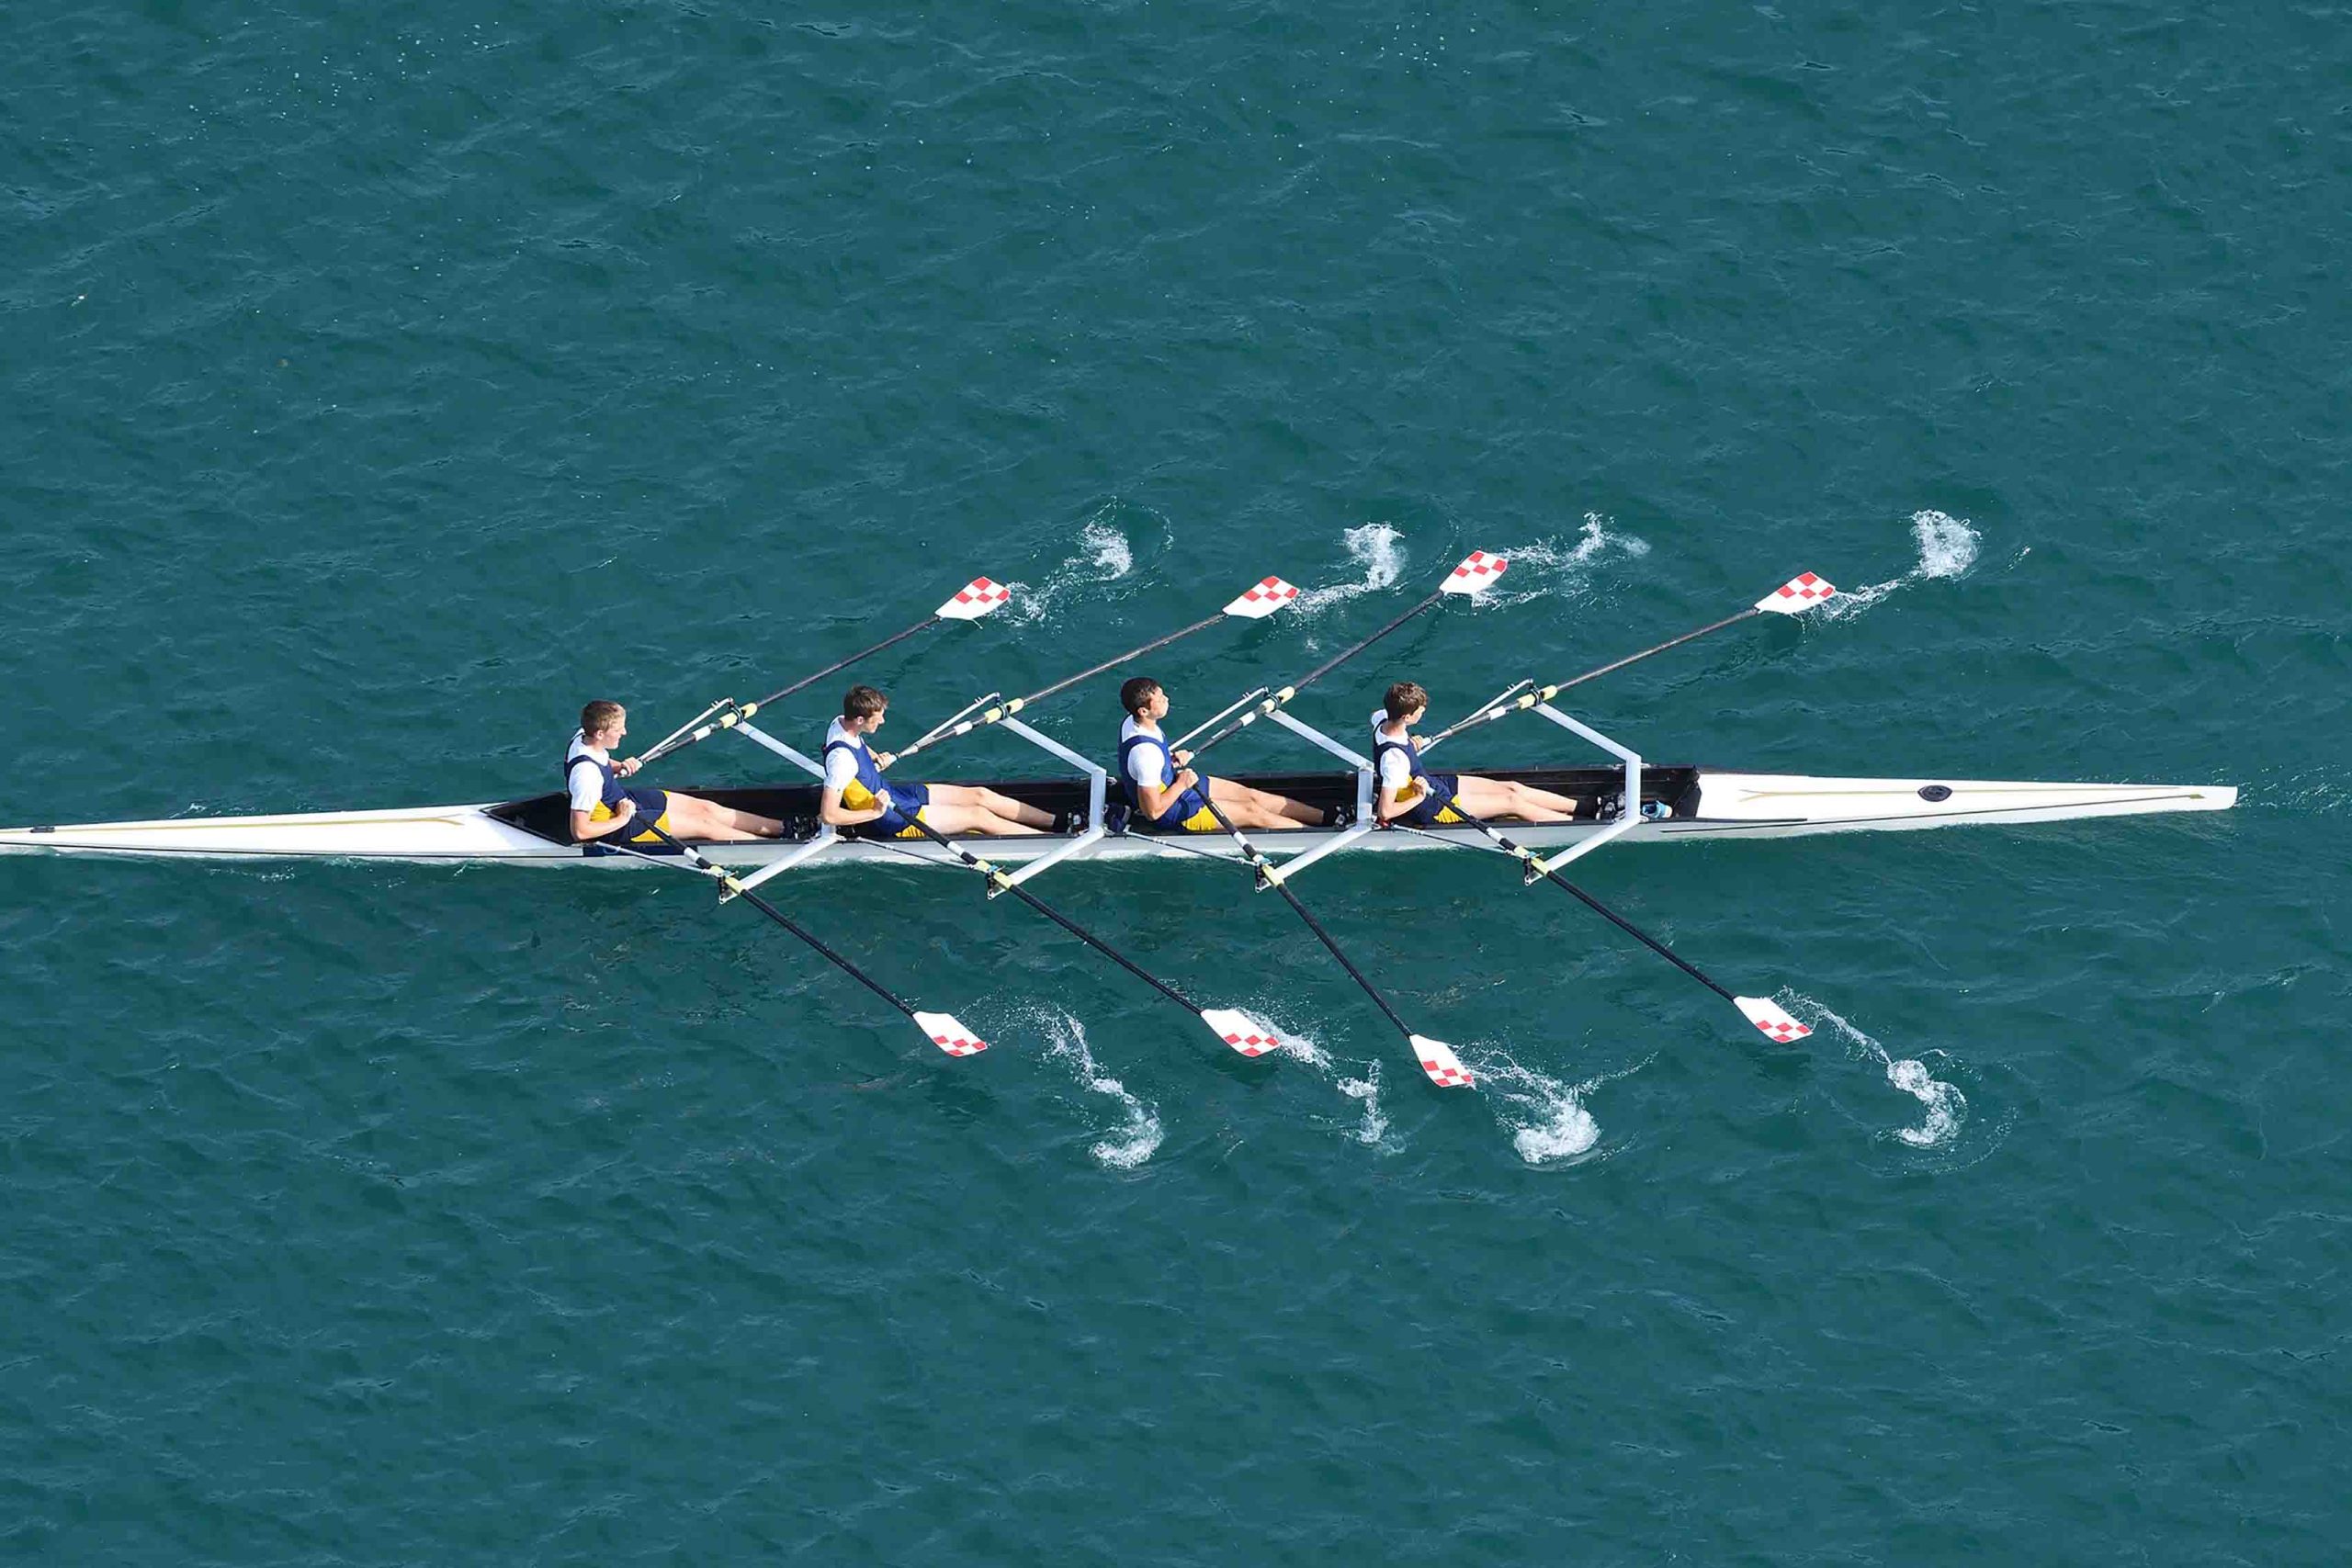 The National Team Wins the First Olympic License in Rowing